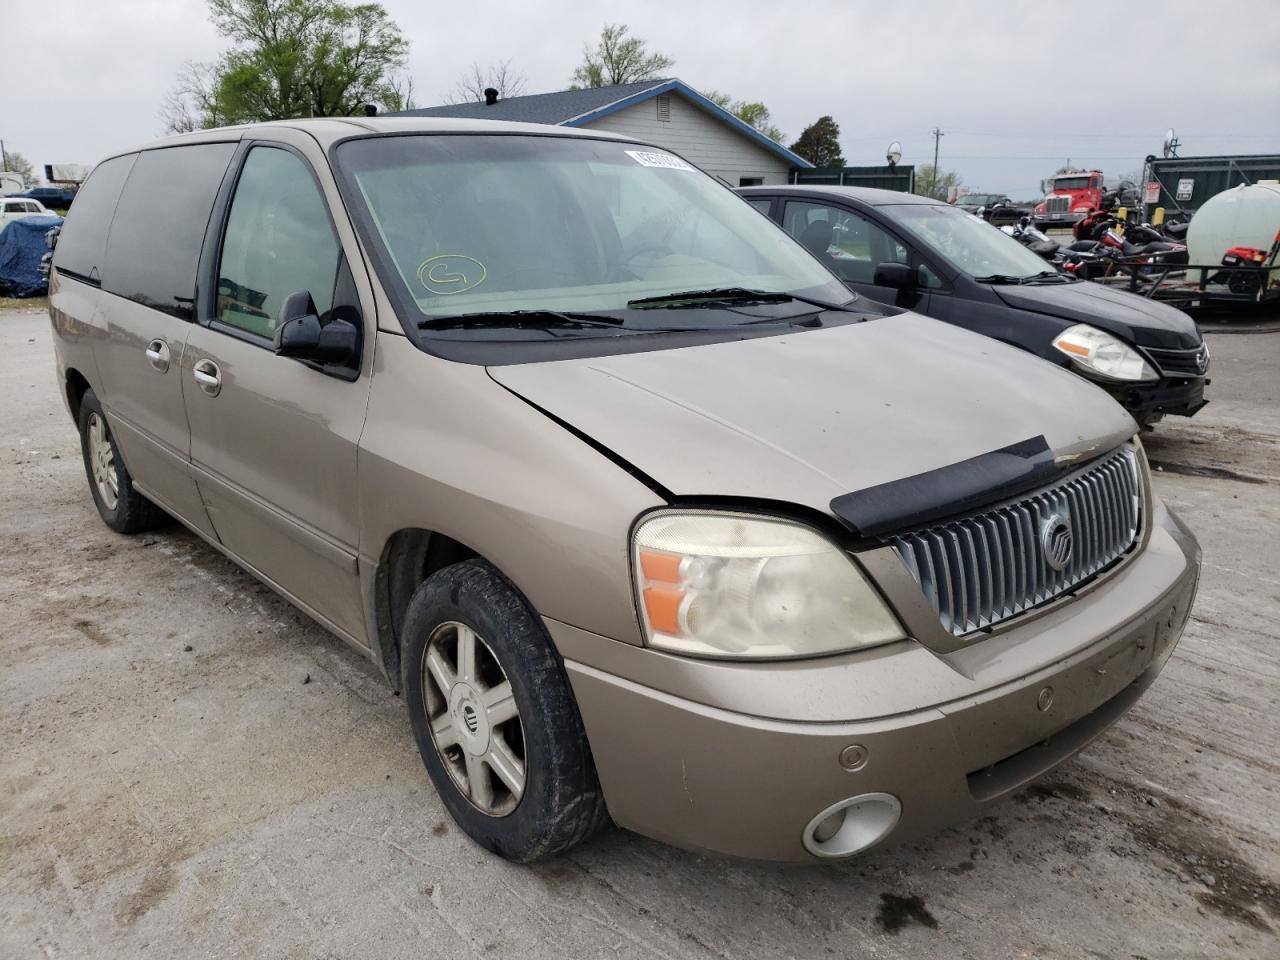 2004 Mercury Monterey for sale at Copart Sikeston, MO Lot #42570*** |  SalvageReseller.com